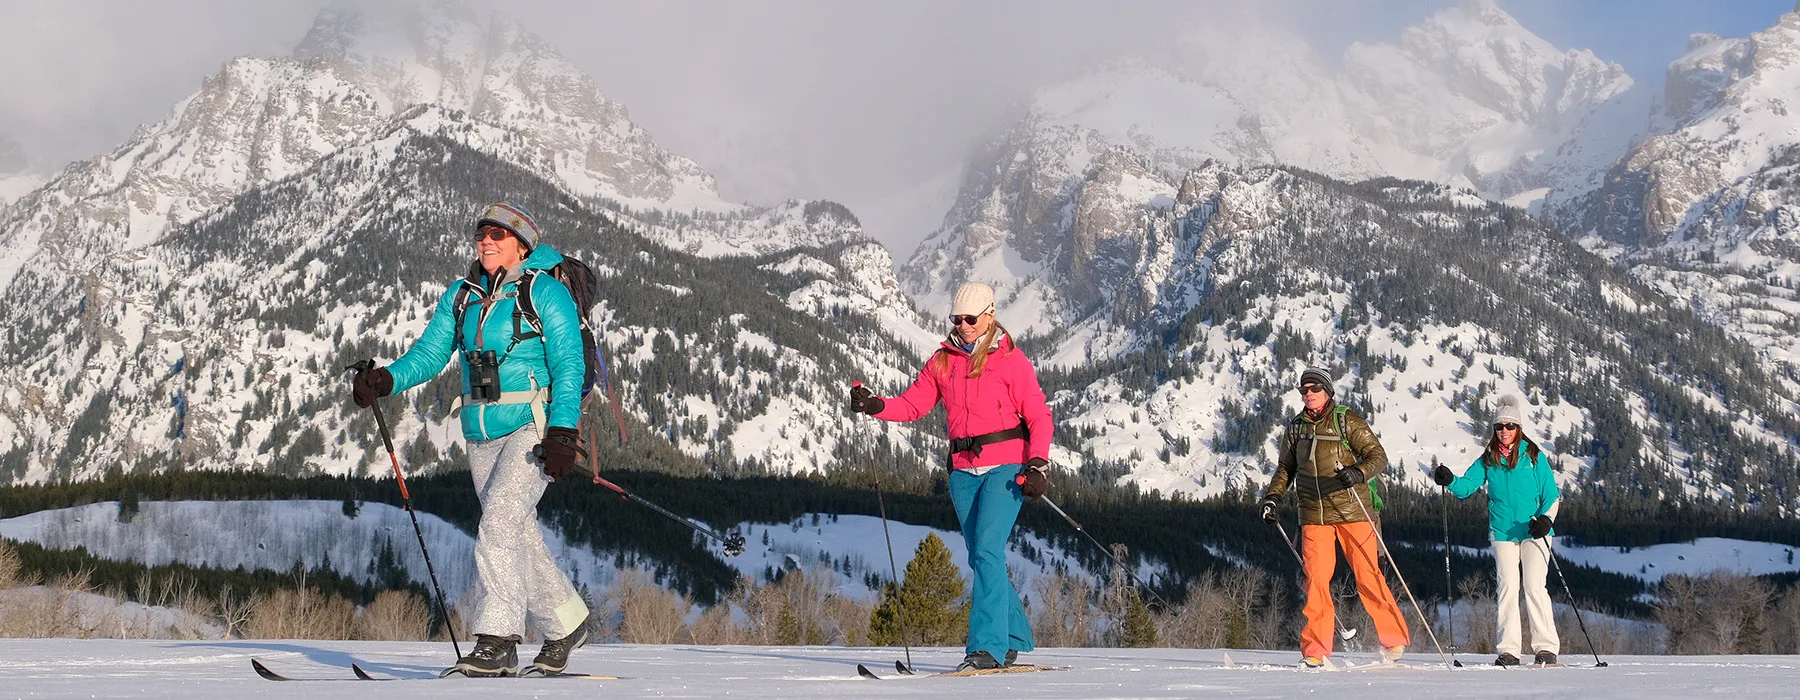 Four Women on Cross-Country Ski Tour in Grand Teton National Park - Hole Hiking Experience